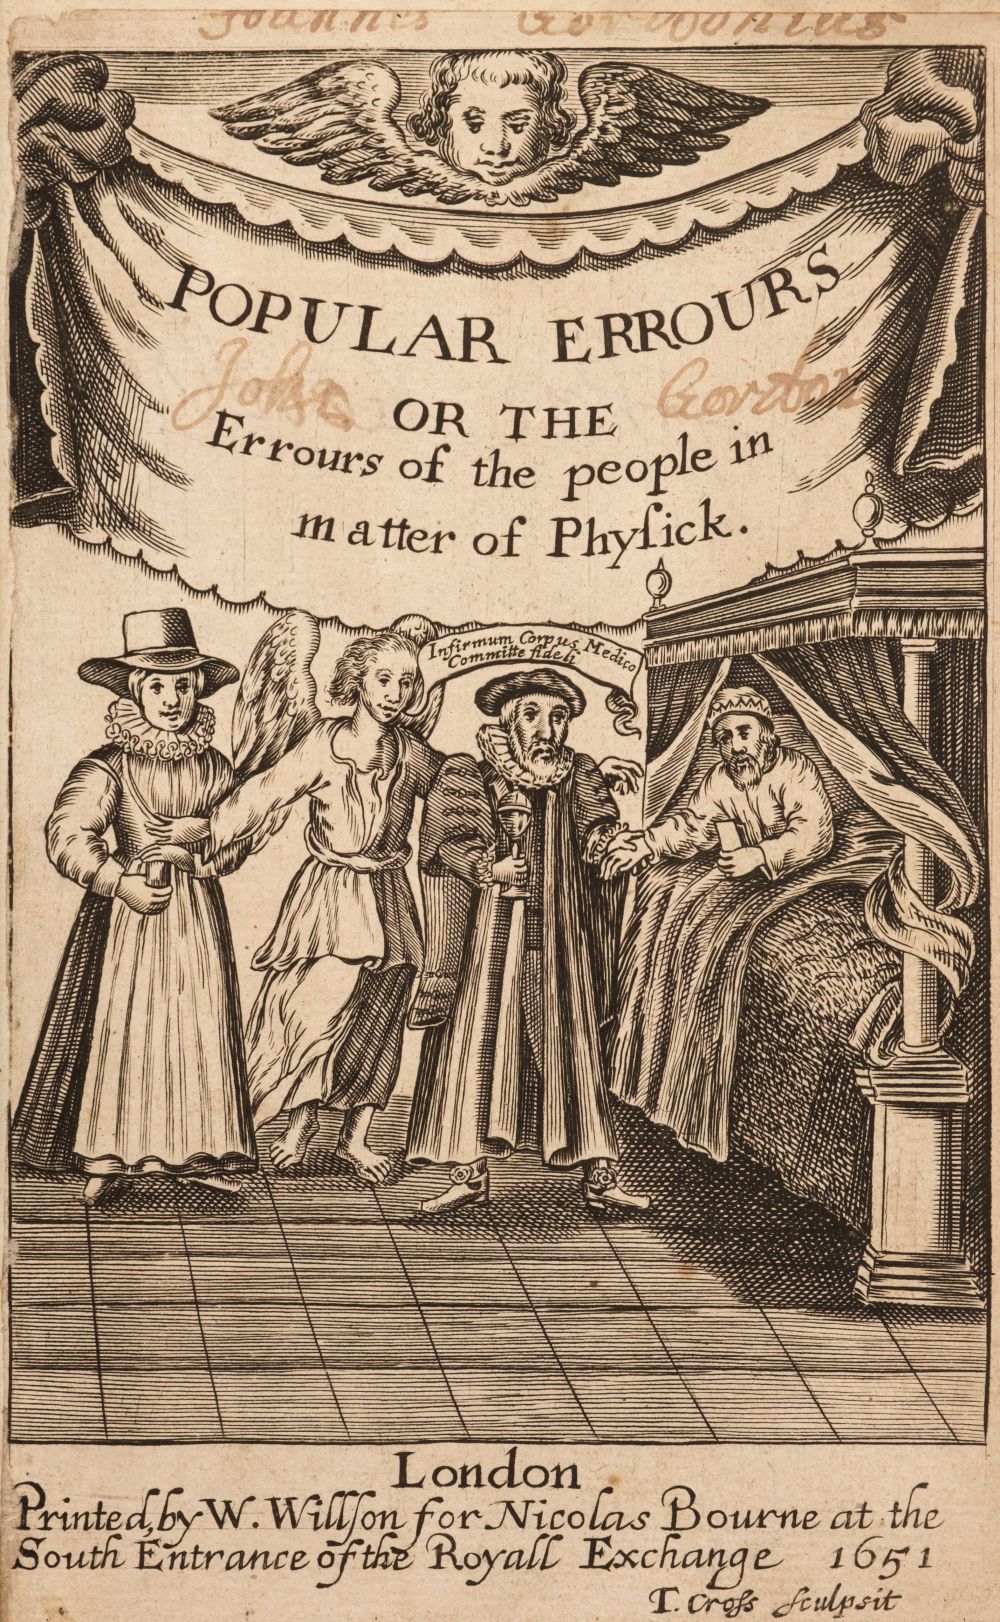 Primrose (James). Popular errours, Or the errours of the people in physick, 1st edition, 1651